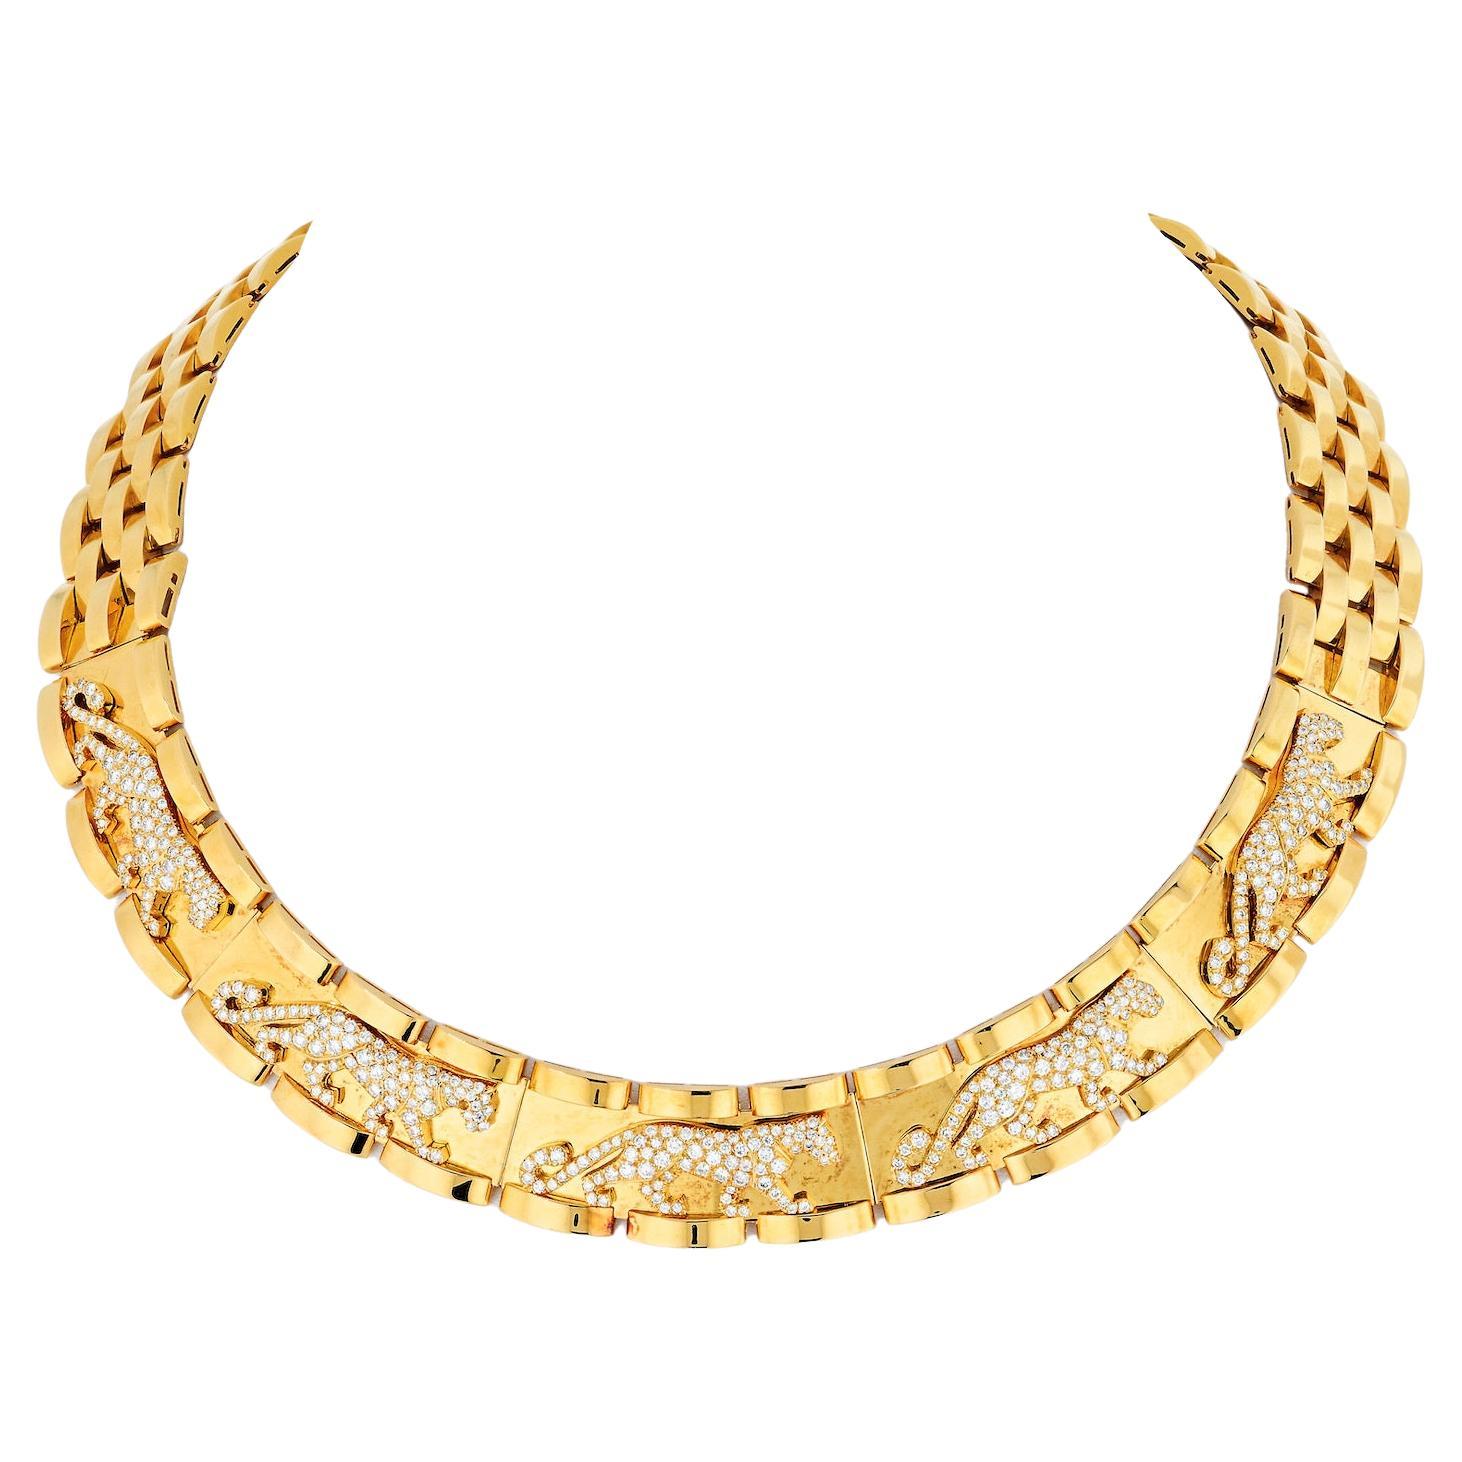 Cartier 18K Yellow Gold Walking Panthere Maillon Necklace